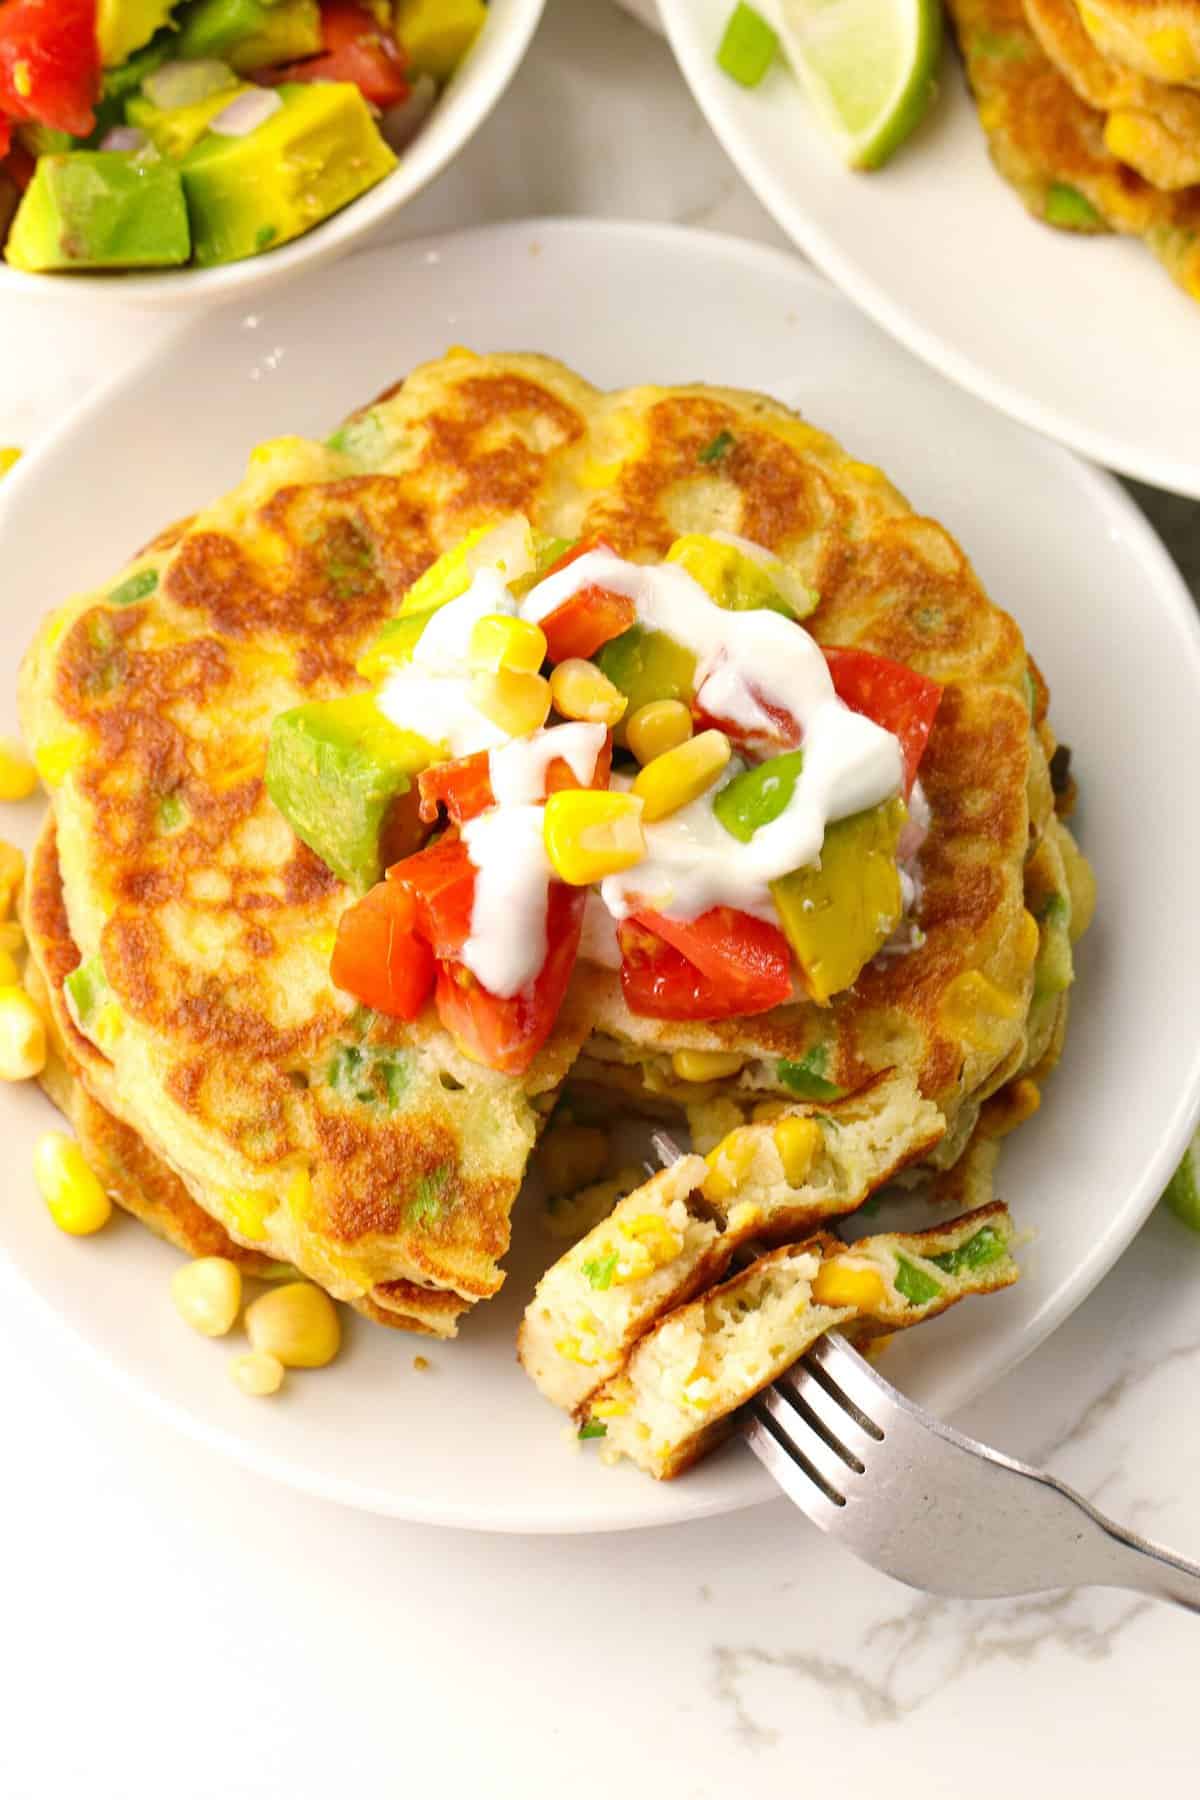 Enjoying a plateful of corn cakes topped with tomatoes, sour cream, avocados, and fresh corn